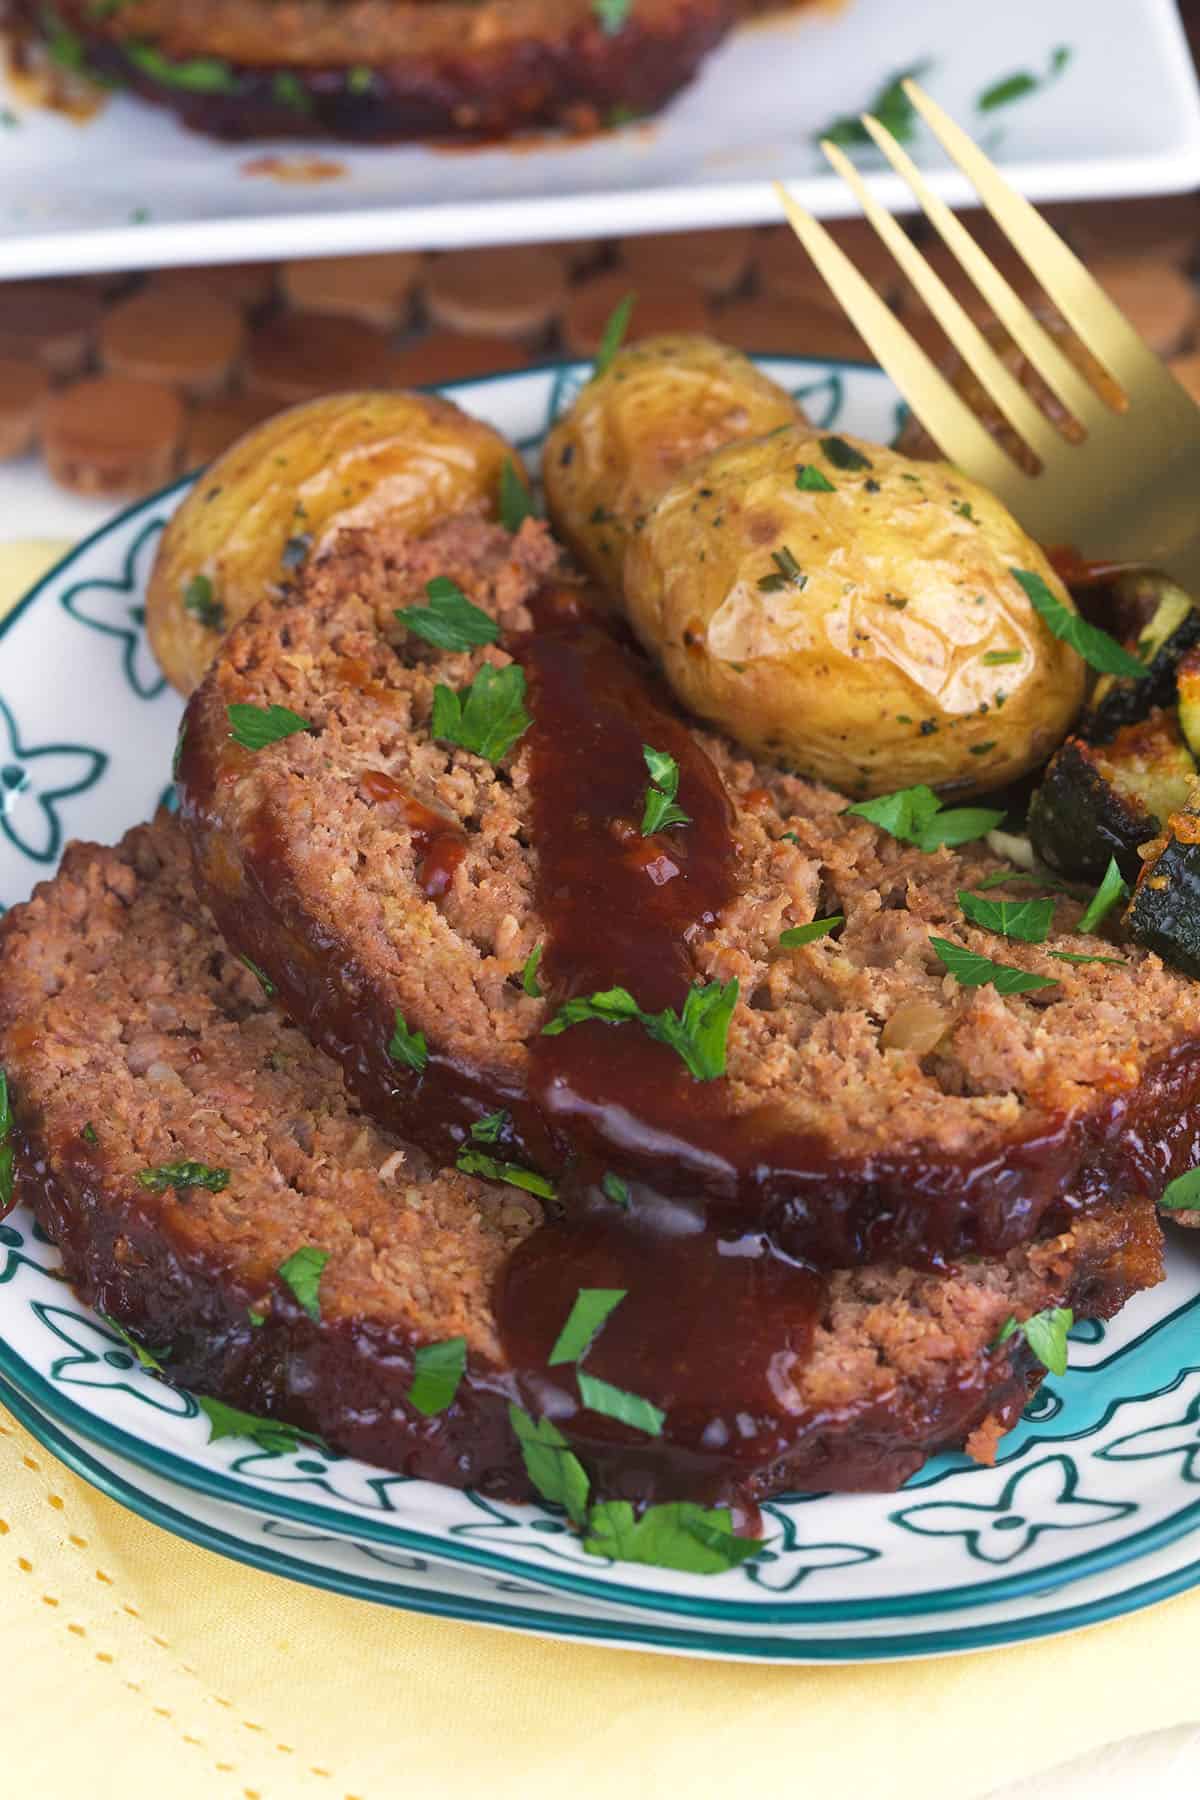 Sliced meatloaf is plated next to roasted potatoes.